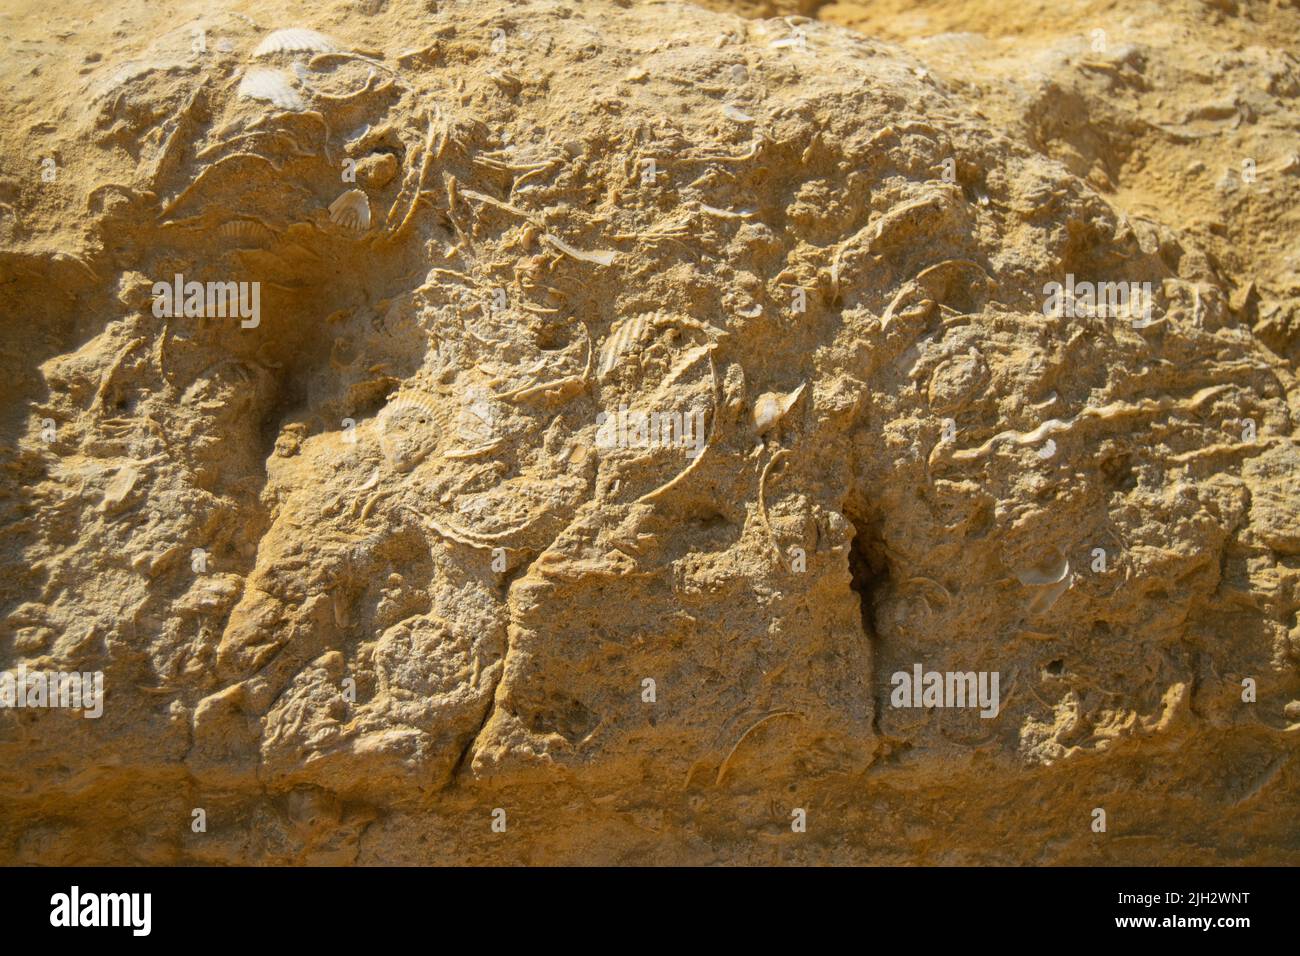 Fossilized shells and ocean species founded on cliff rocks. Ocean and abstract themes. History and geology, ocean levels on old era. Ocean high level remains. Stock Photo